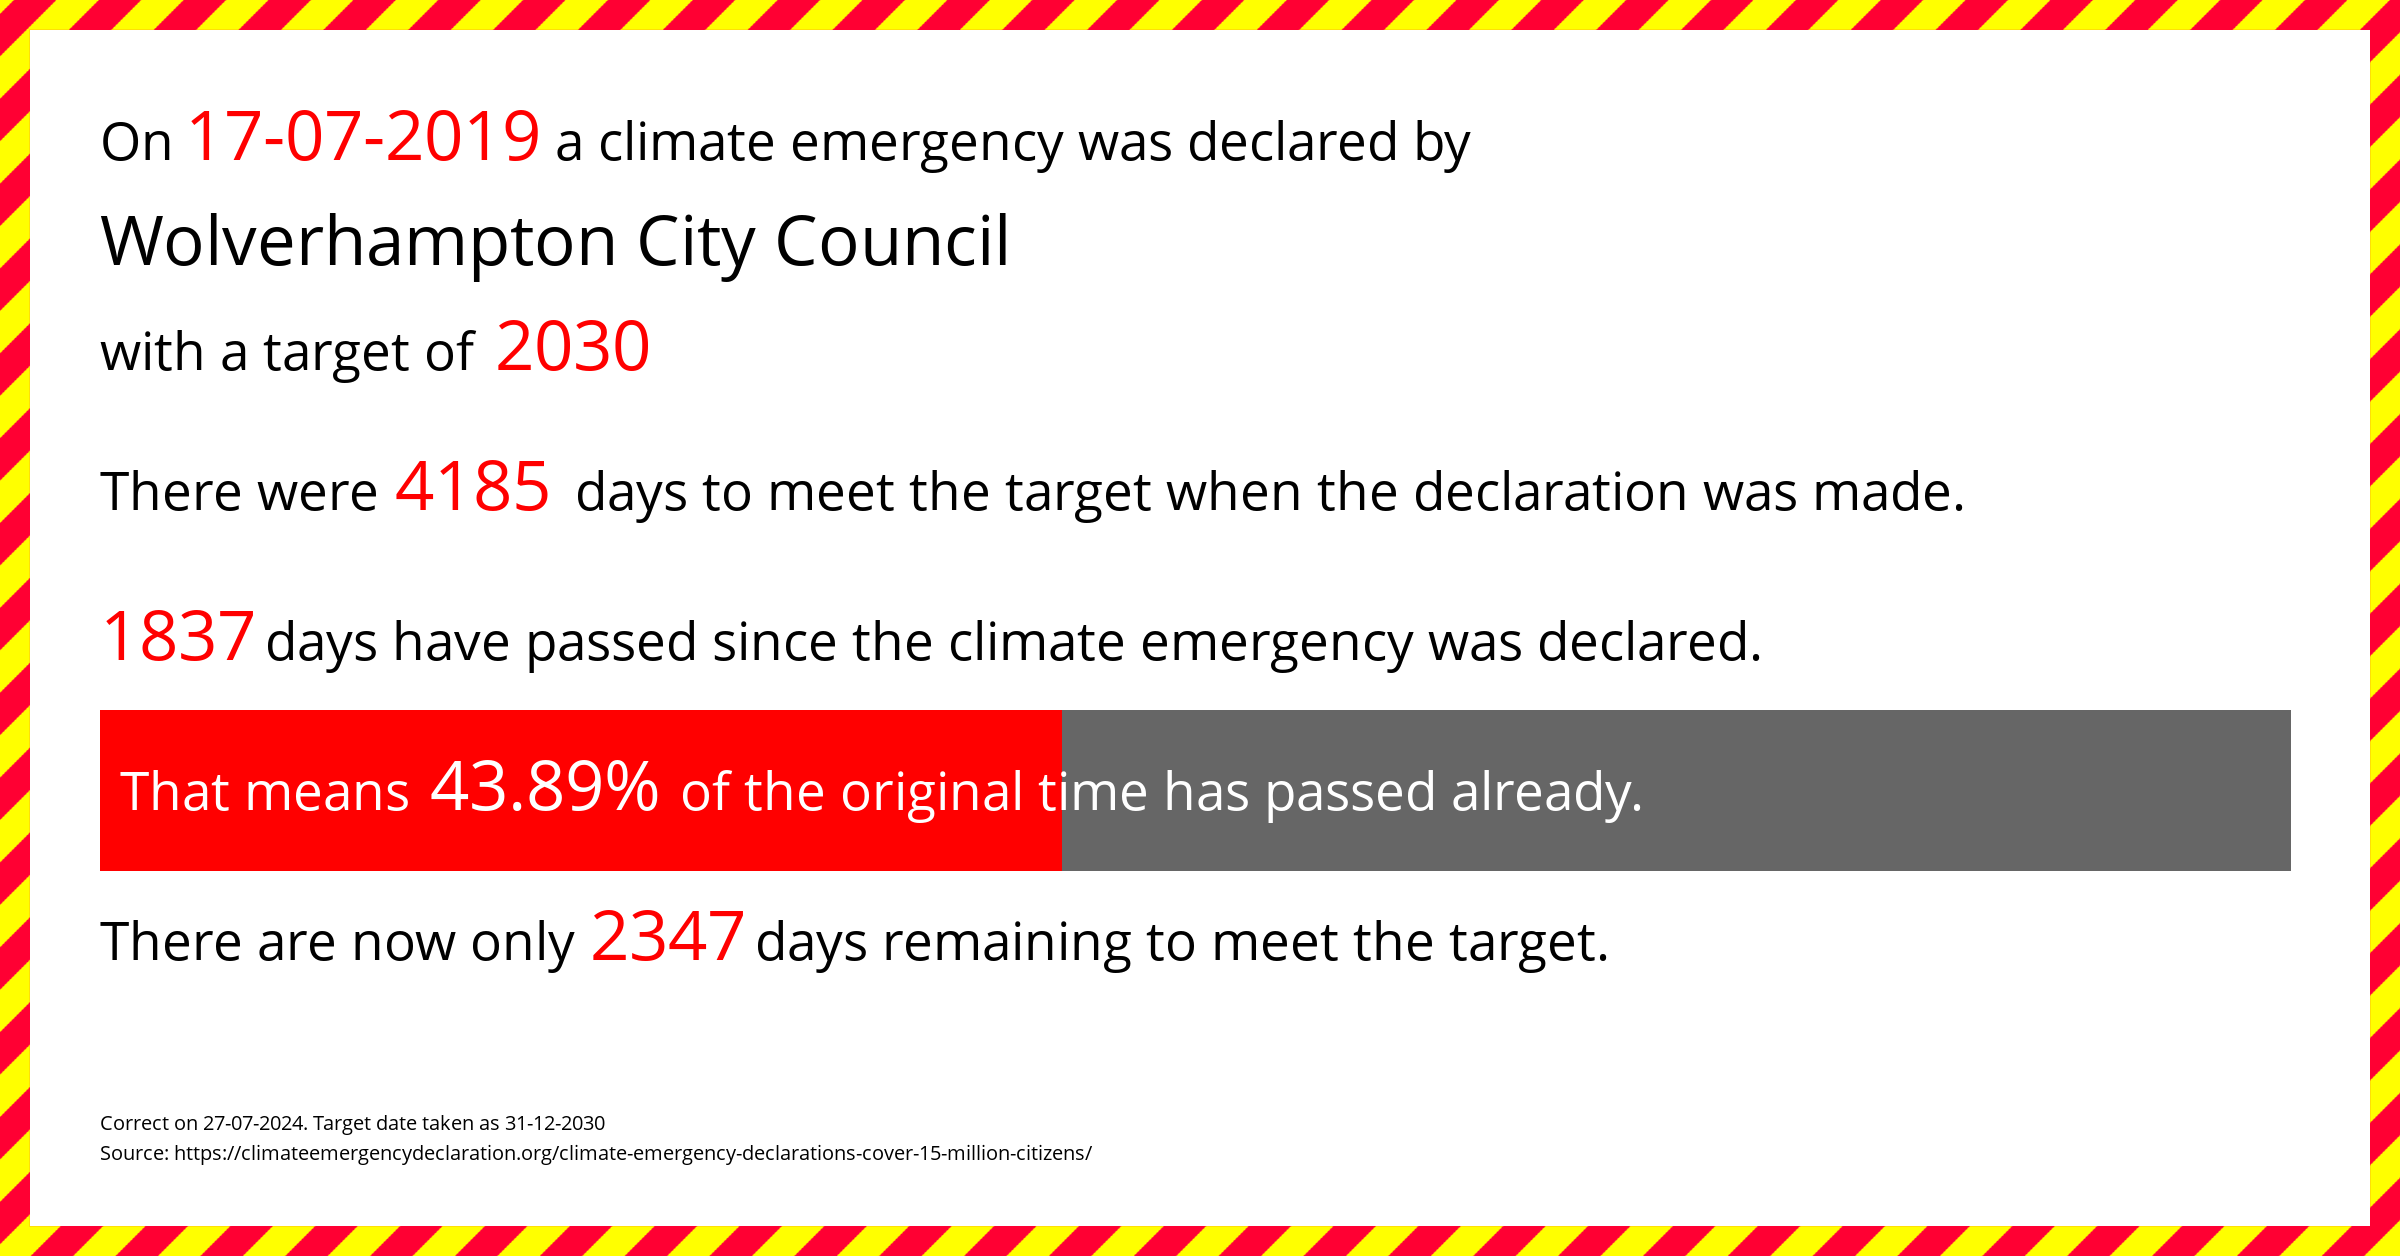 Wolverhampton City Council declared a Climate emergency on Wednesday 17th July 2019, with a target of 2030.